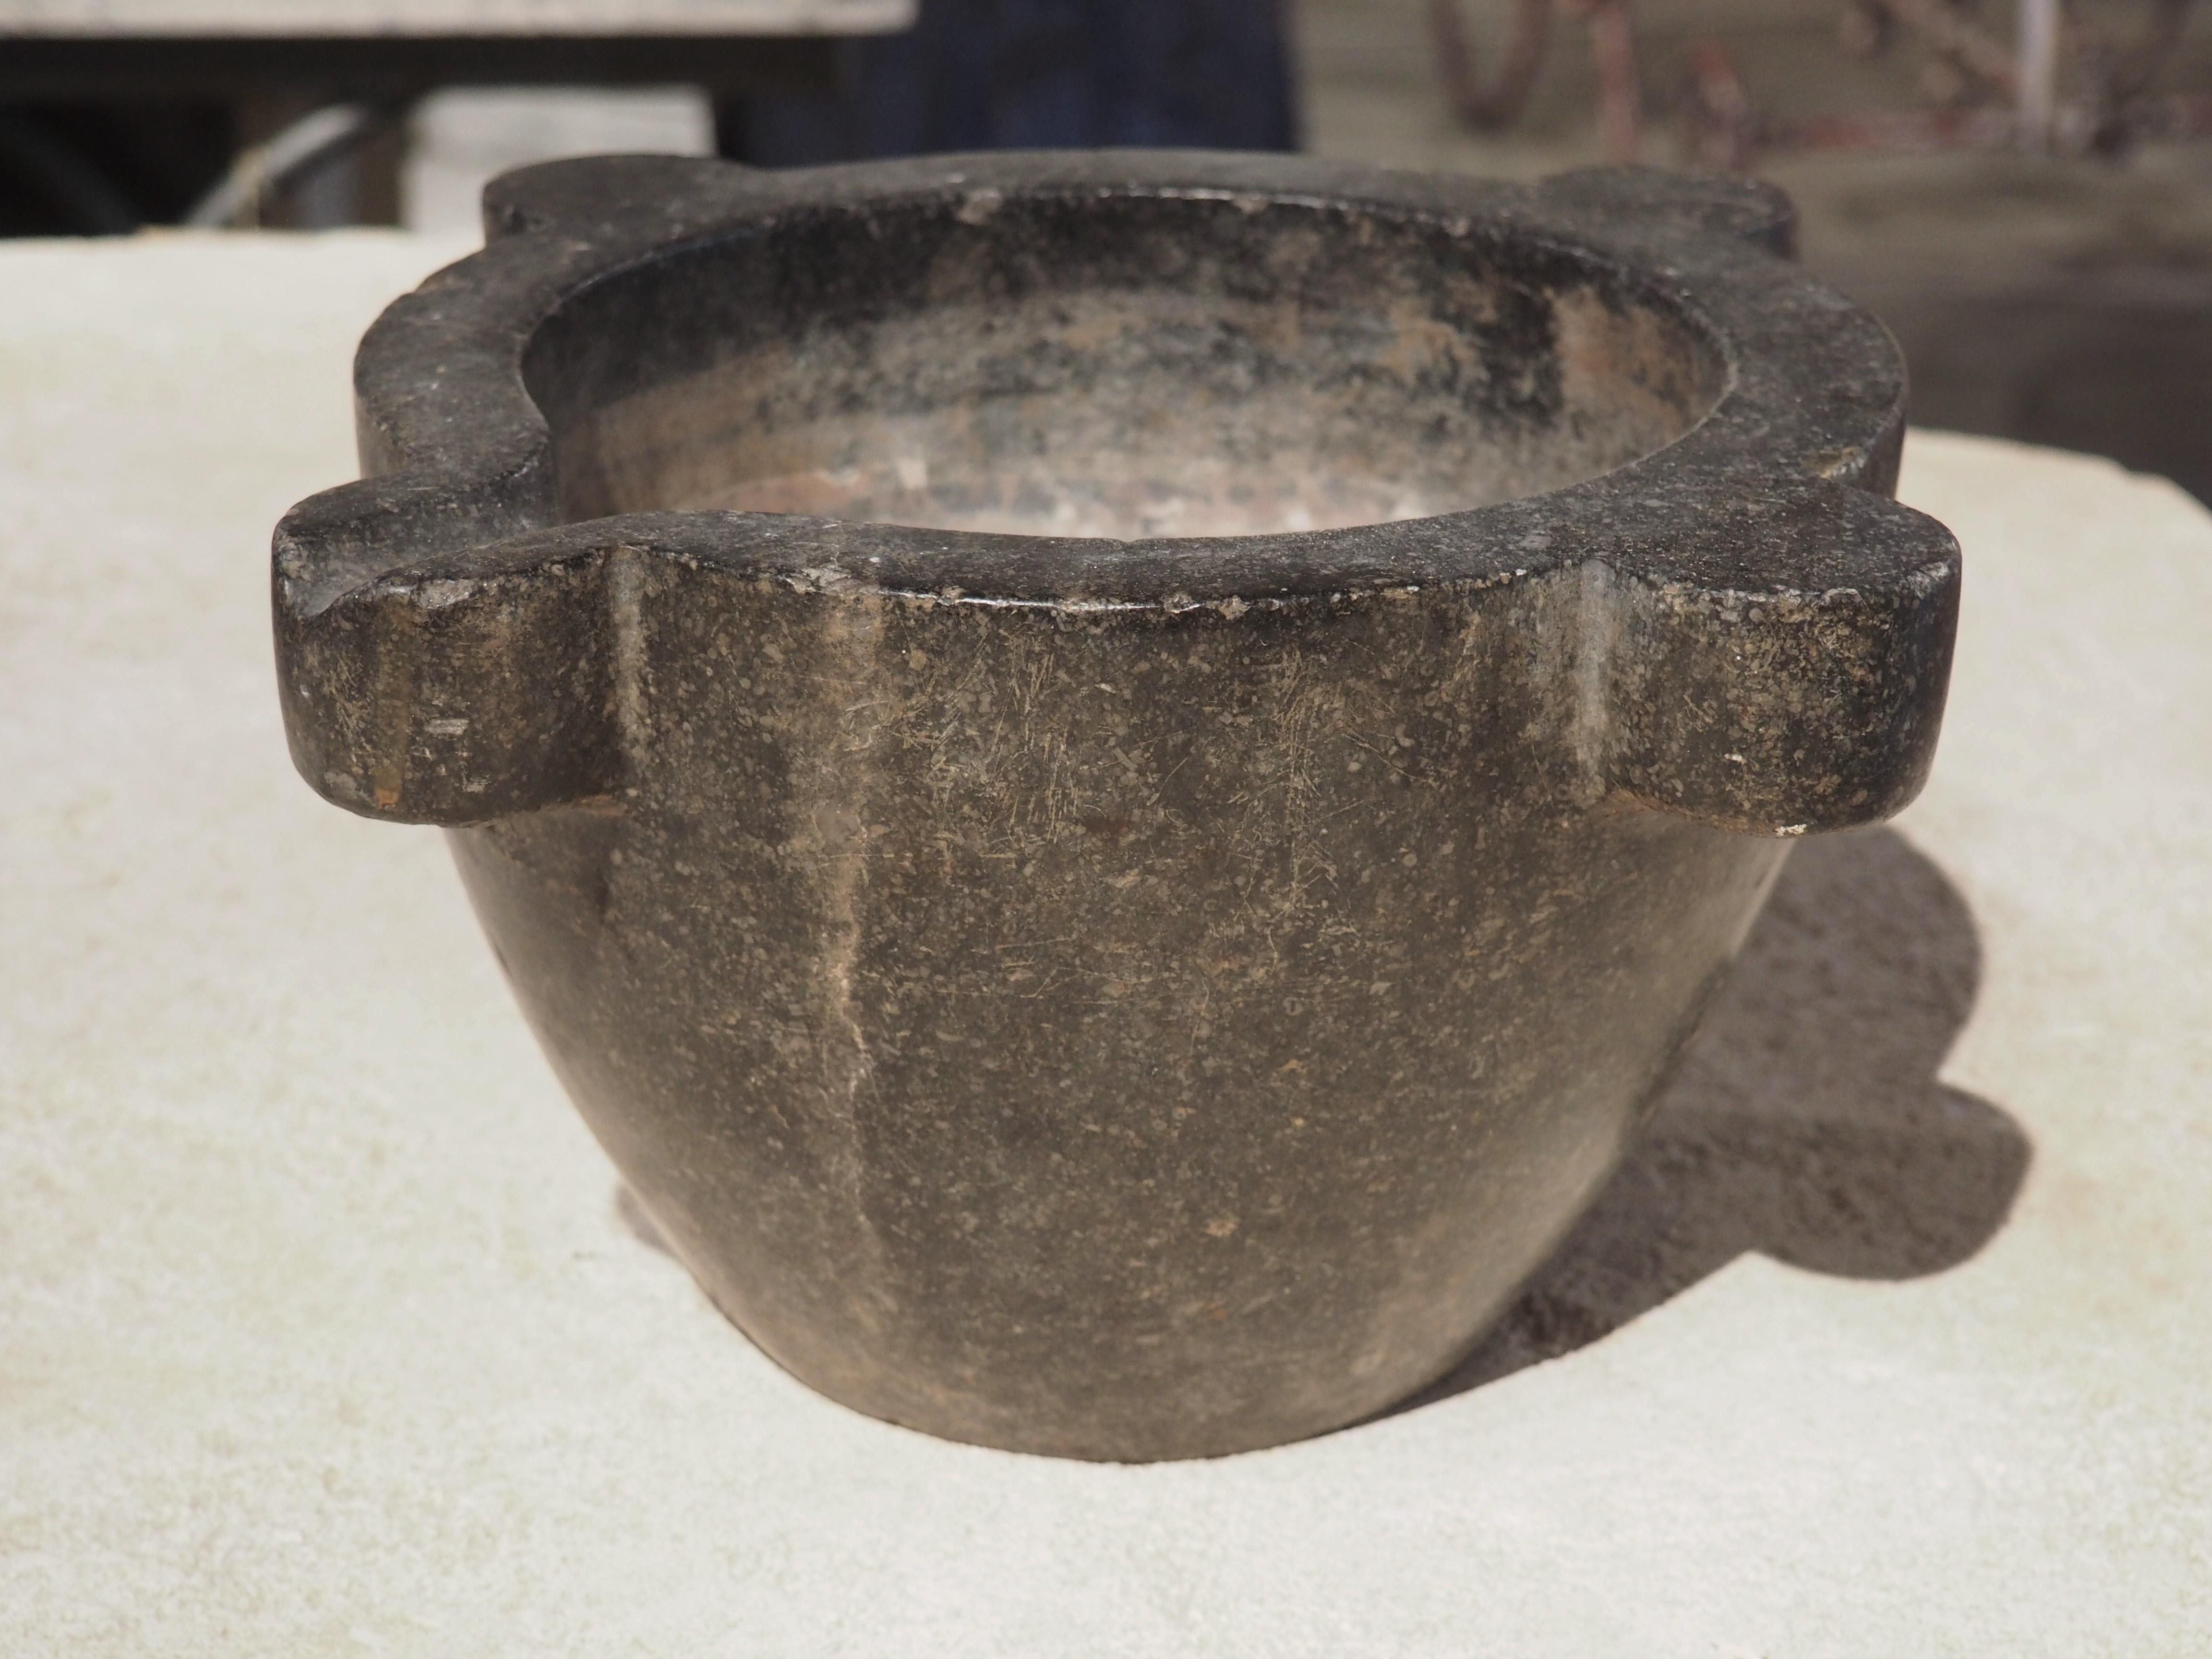 Although the earliest mortars and pestles were utilized for cooking during the Stone Age, in more recent centuries they were employed by pharmacists to grind herbs into powder for medicinal purposes. They were almost always constructed from a